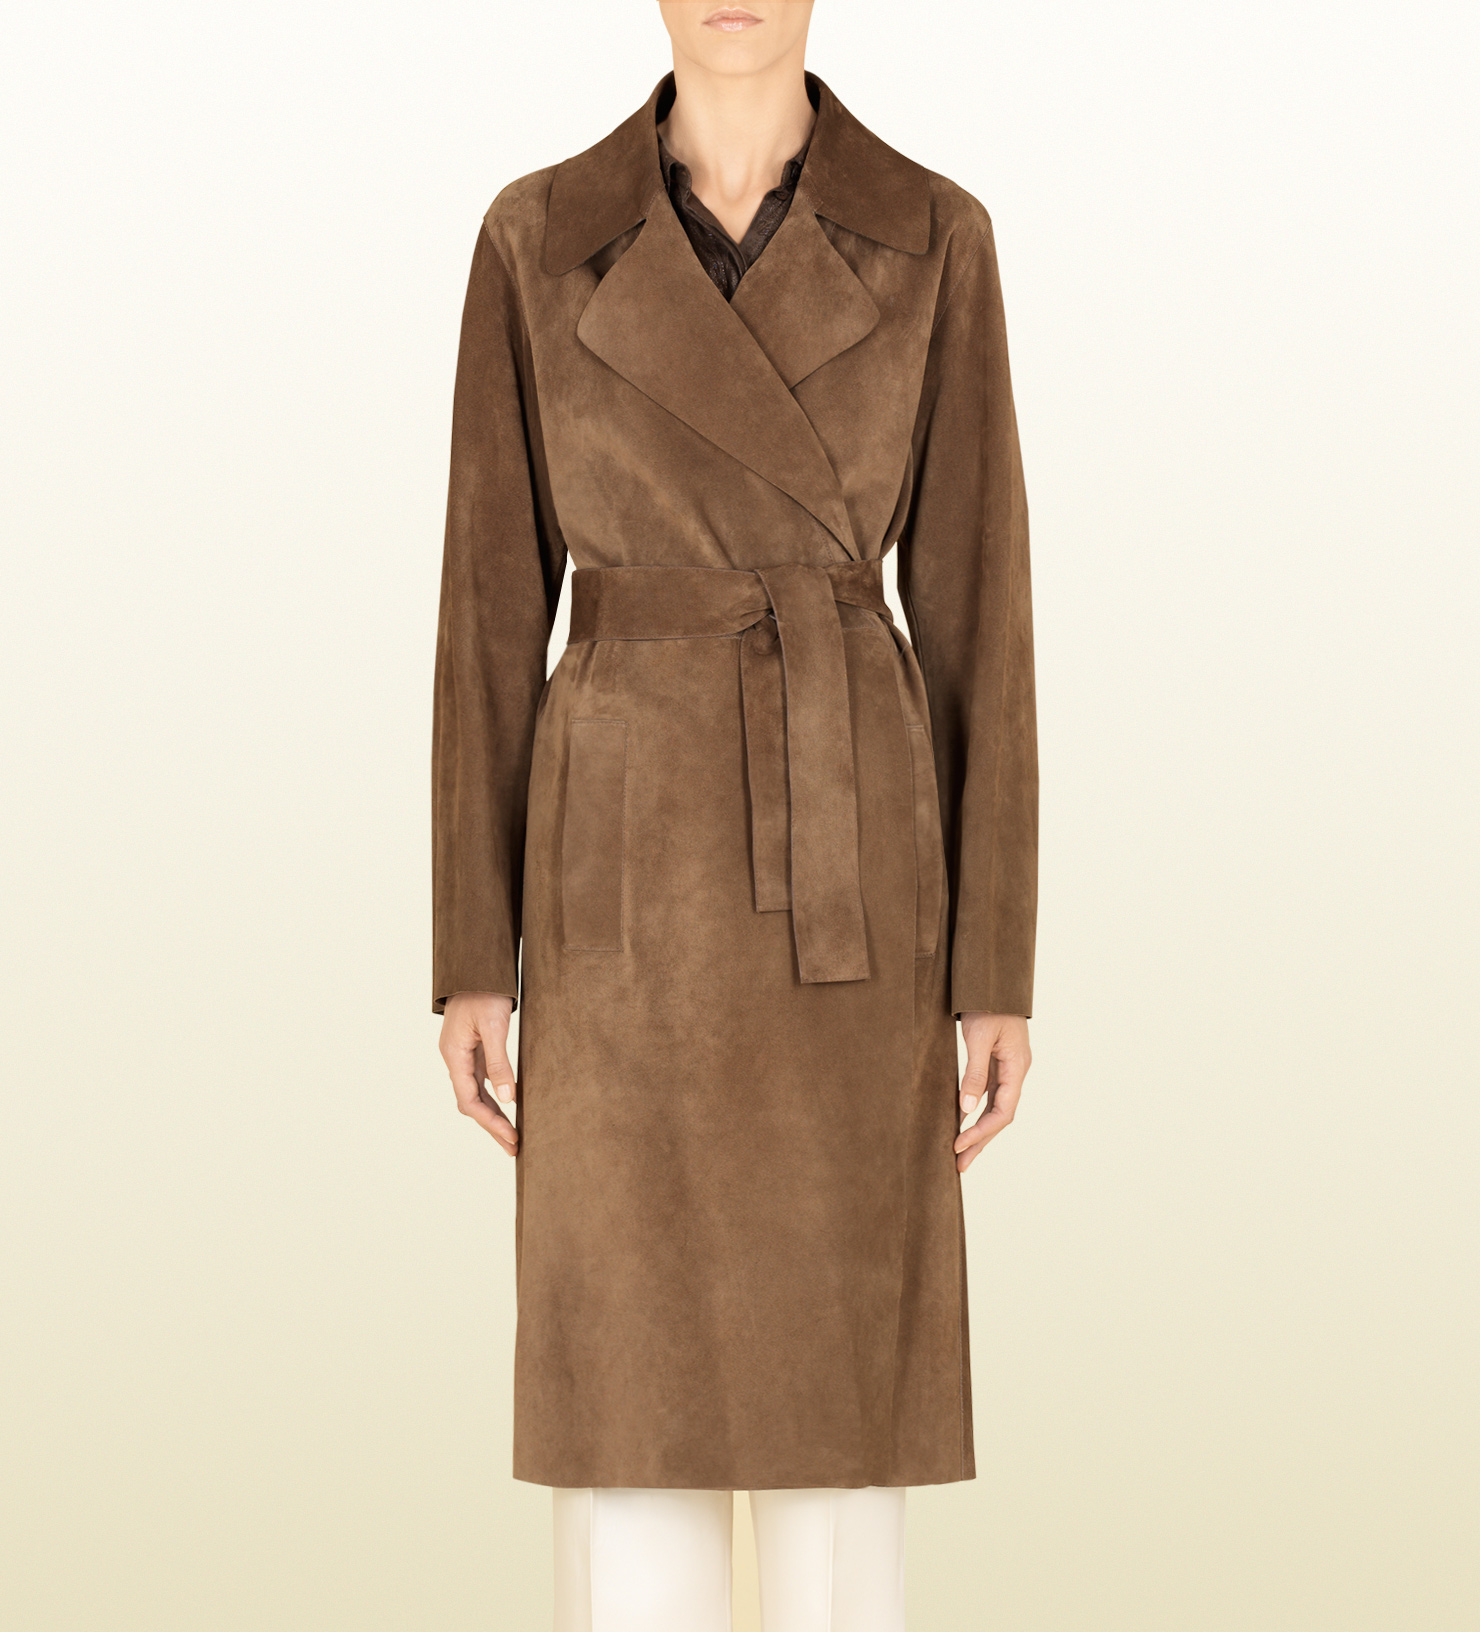 Lyst - Gucci Ash Brown Suede Belted Trench Coat in Brown for Men